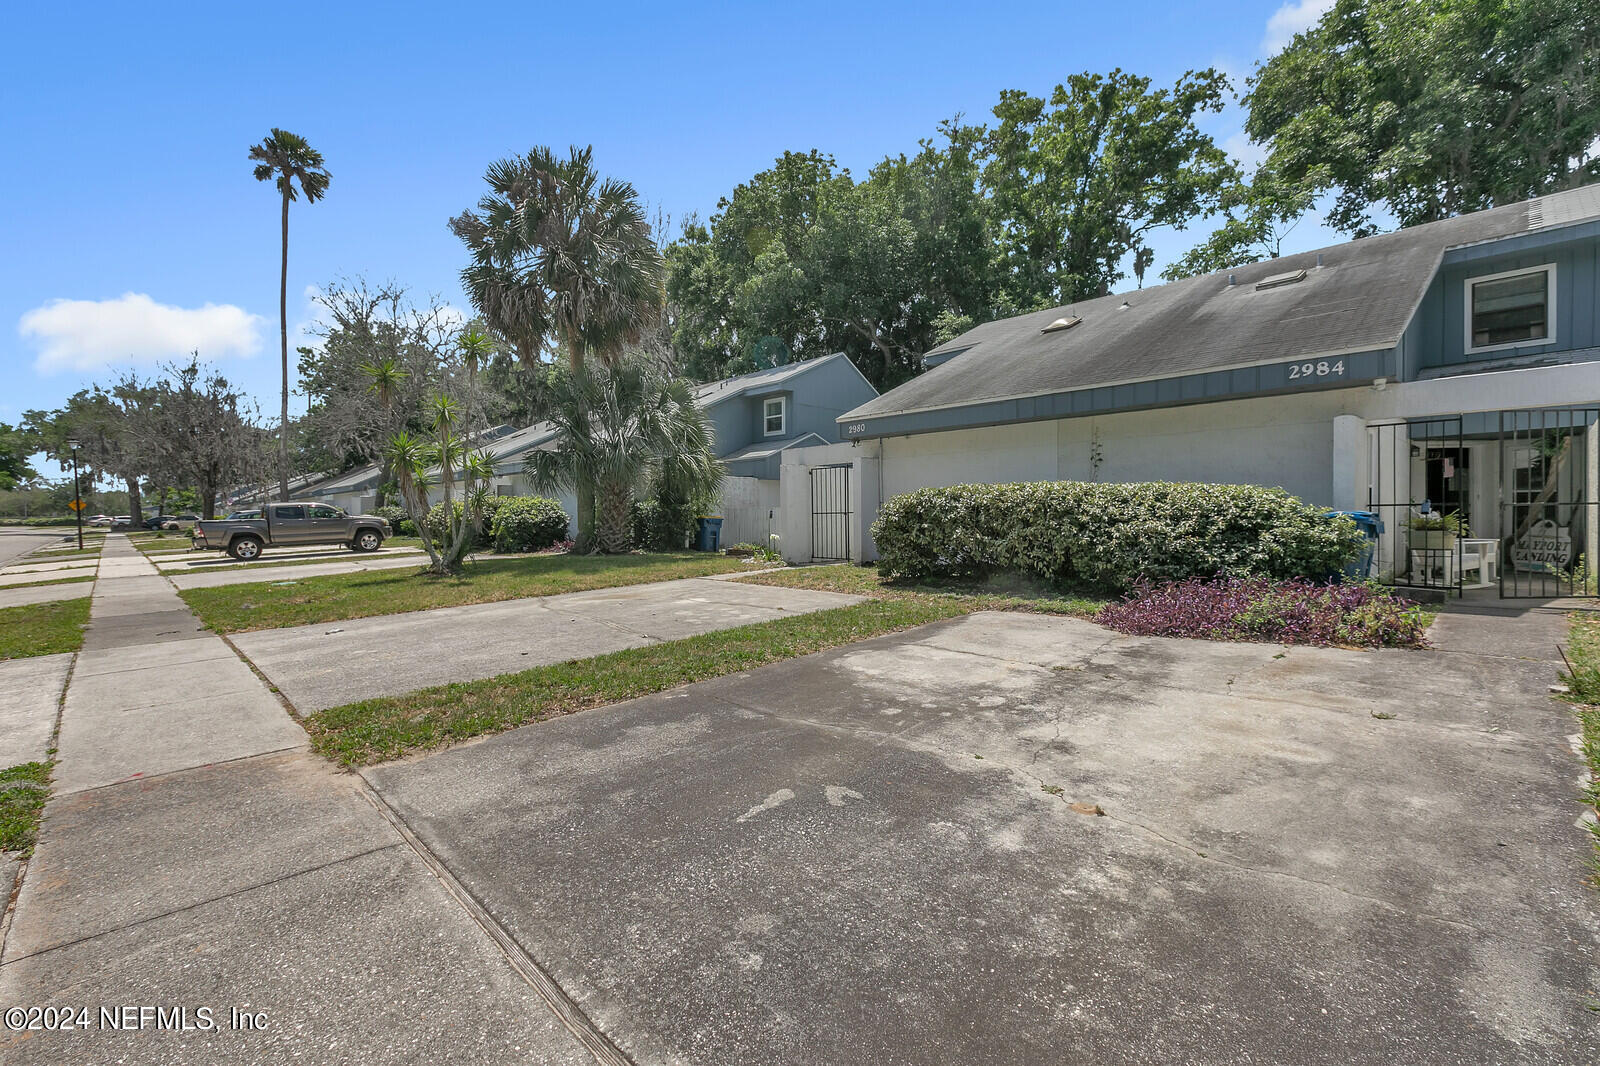 View Jacksonville, FL 32233 townhome